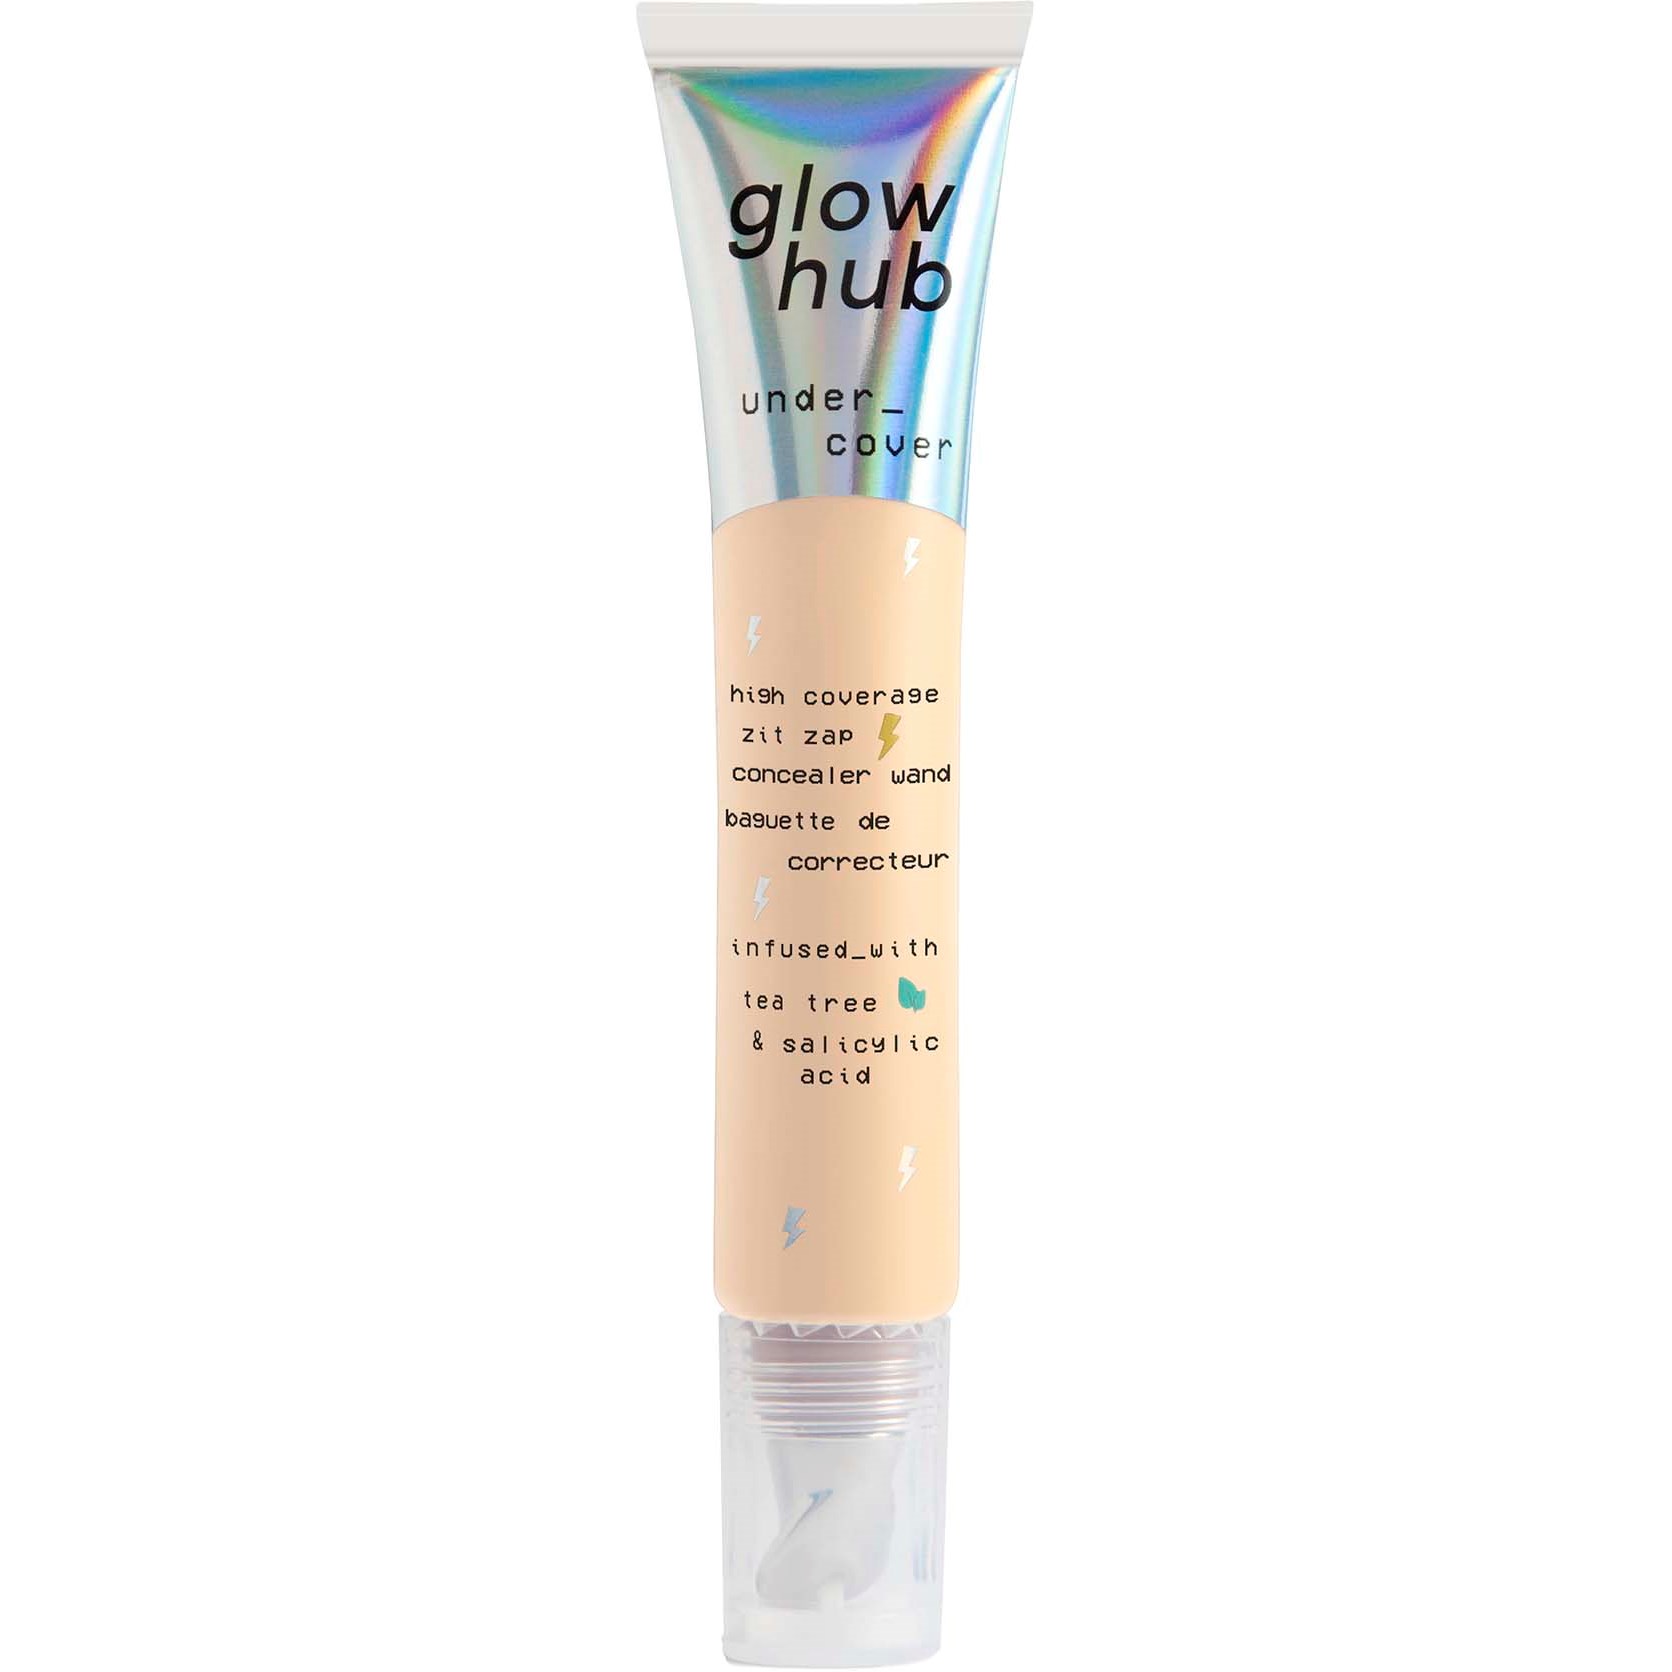 Glow Hub Under Cover High Coverage Zit Zap Concealer Wand 04N Isobel